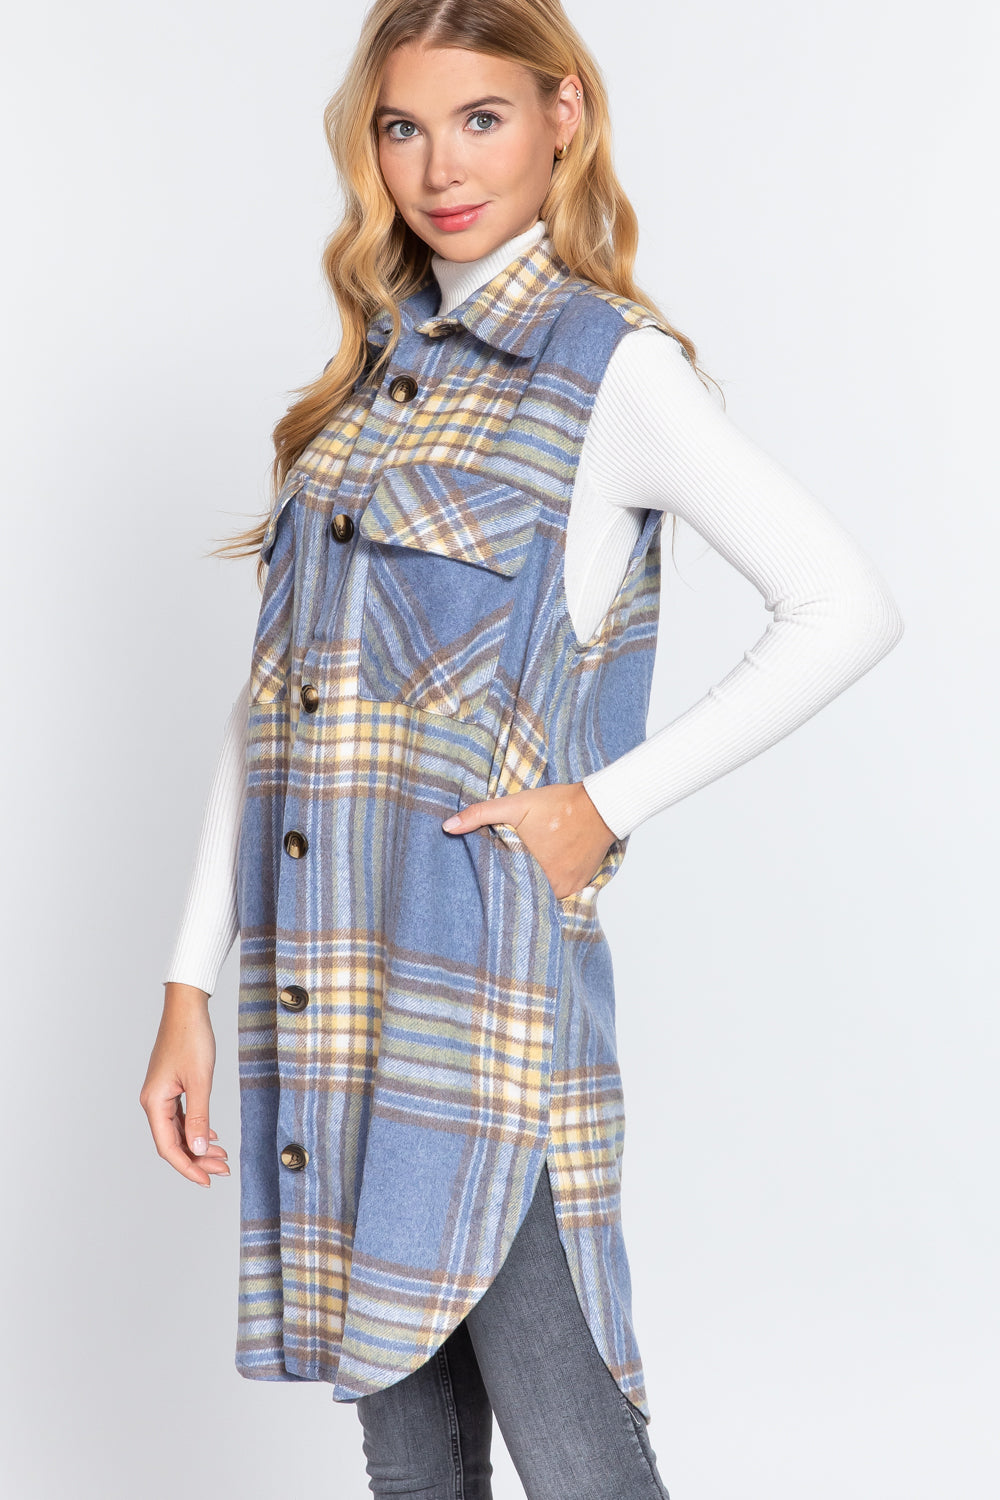 - Notched Collar Brushed Plaid Vest - 2 styles - womens vest at TFC&H Co.